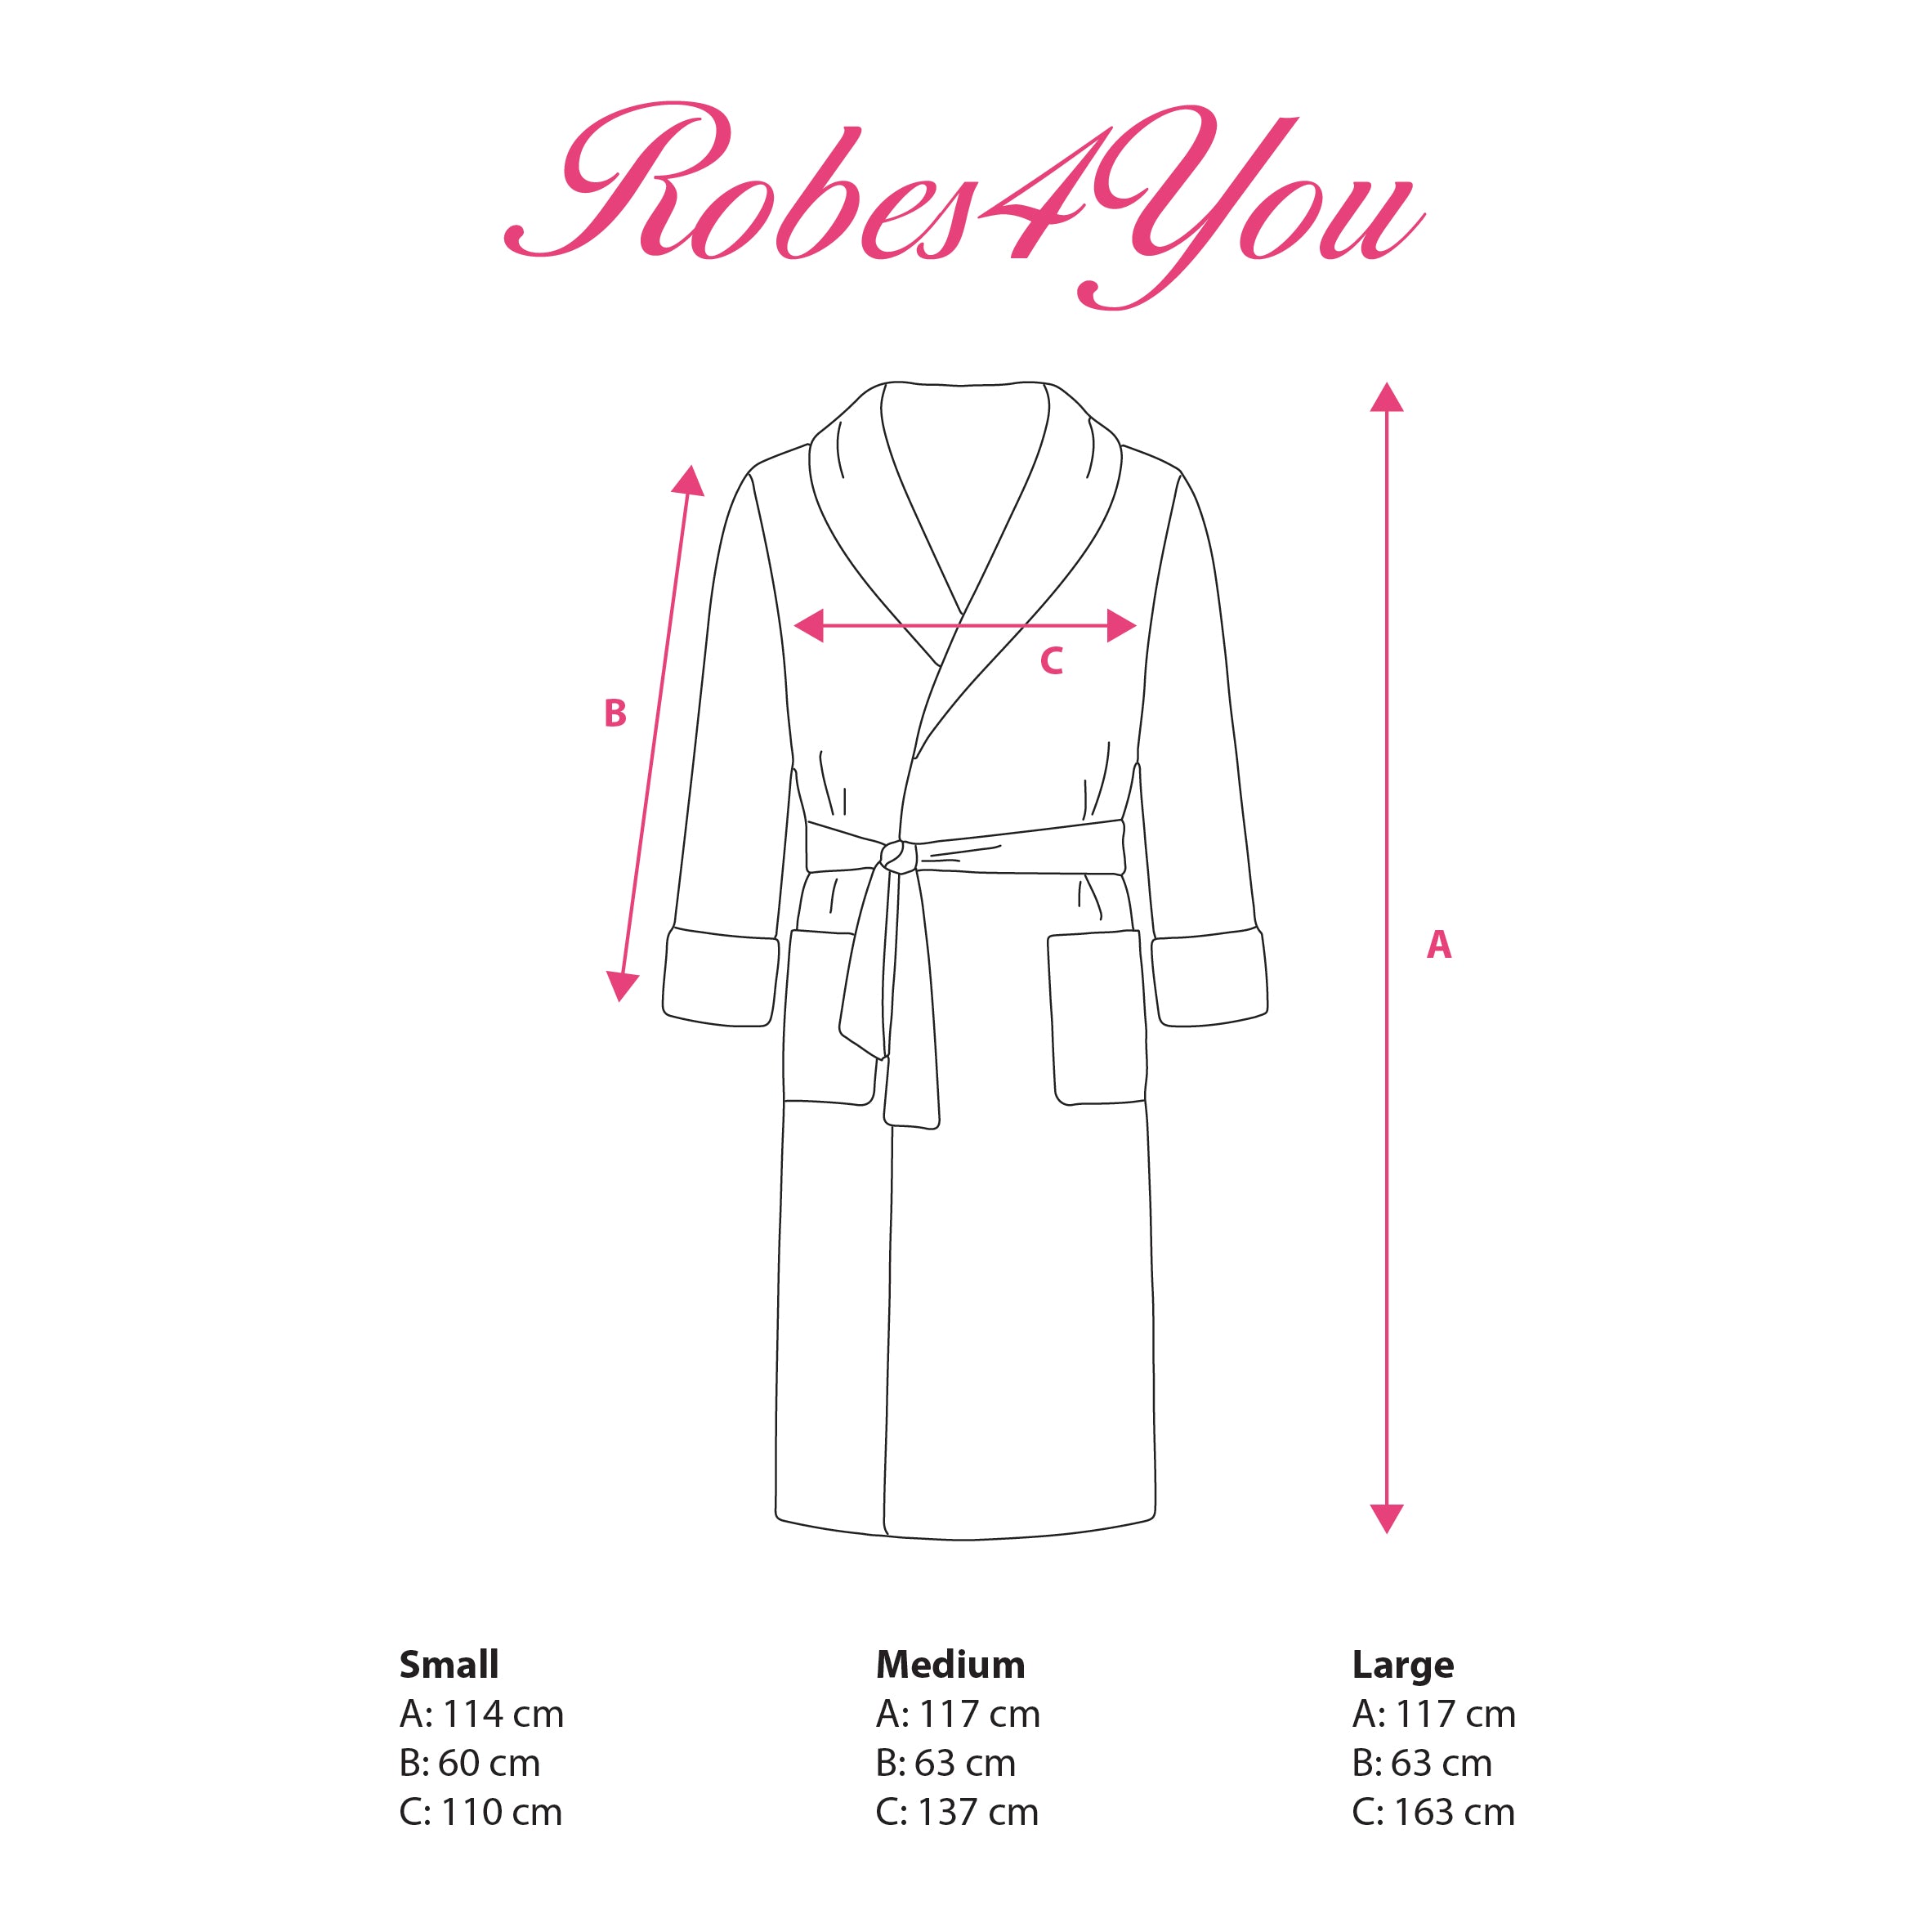 Robes sizing-robes4you